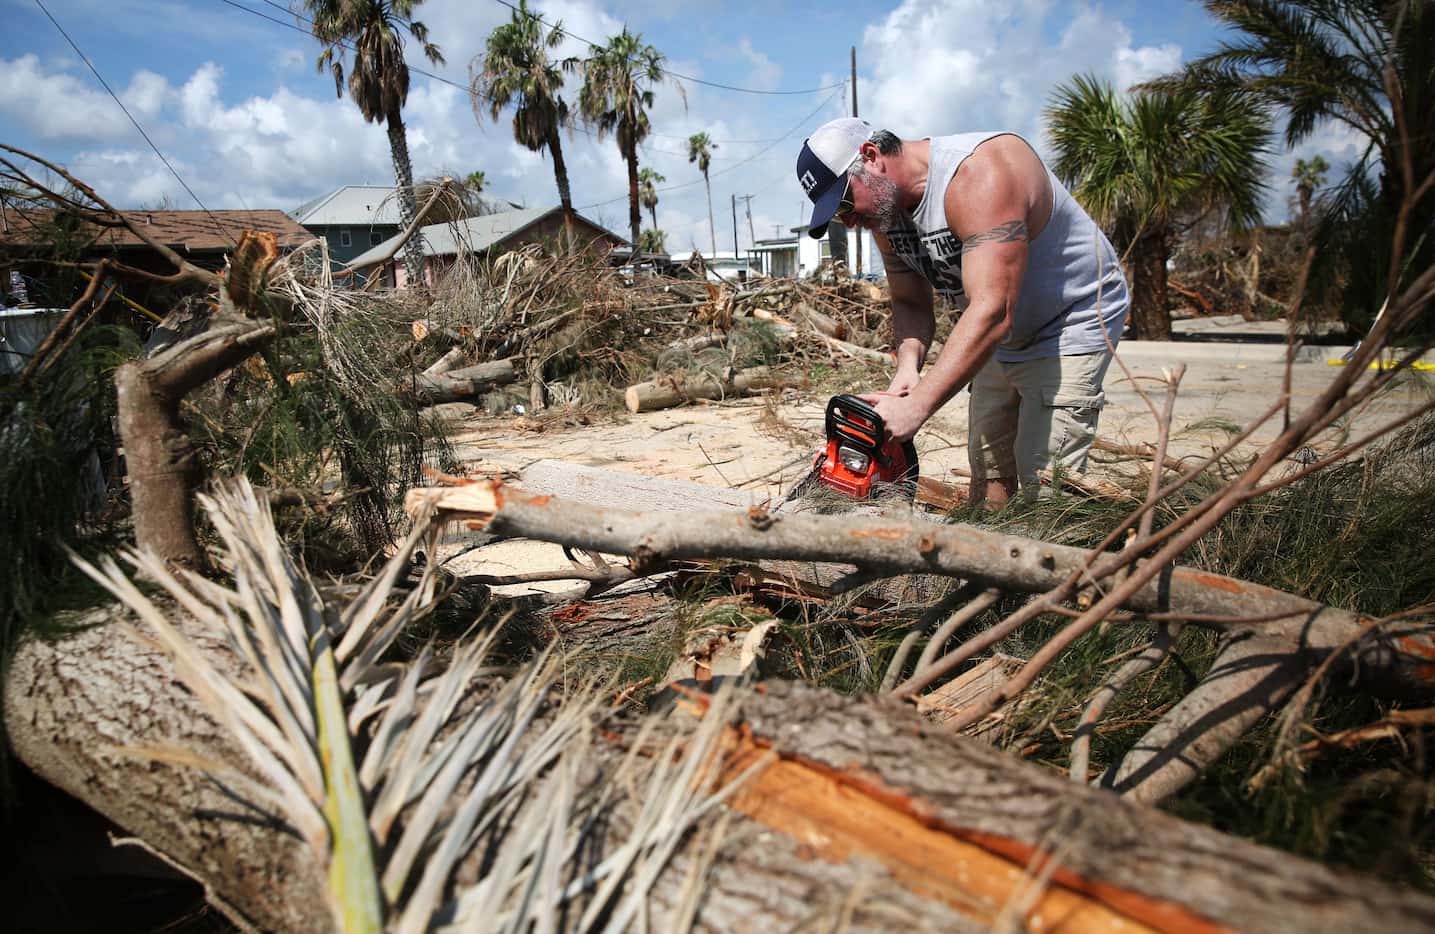 Volunteer Woodie Castaneres of San Antonio uses a chain saw on a fallen palm tree outside...